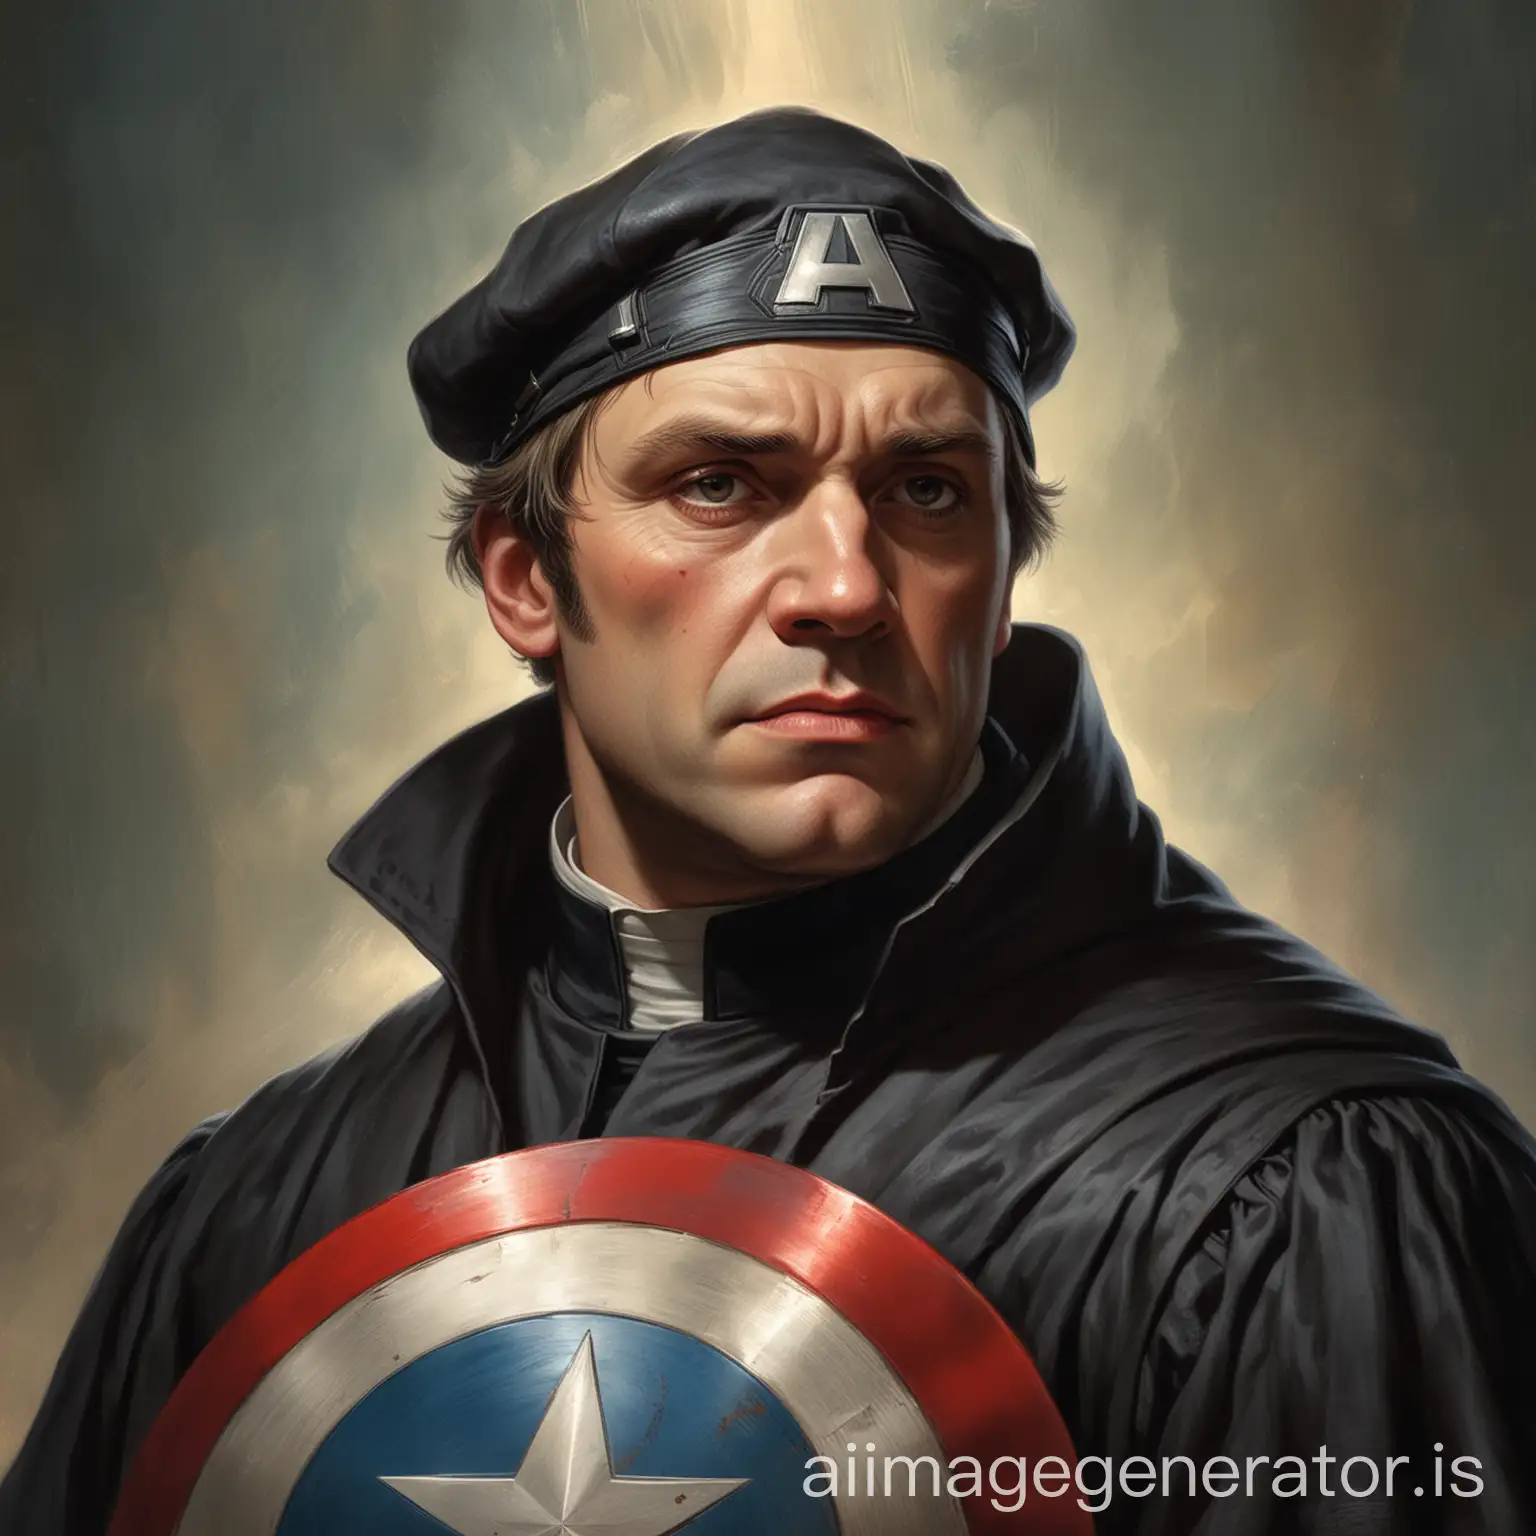 Martin-Luther-Reimagined-as-Captain-America-Leading-the-Protestant-Reformation